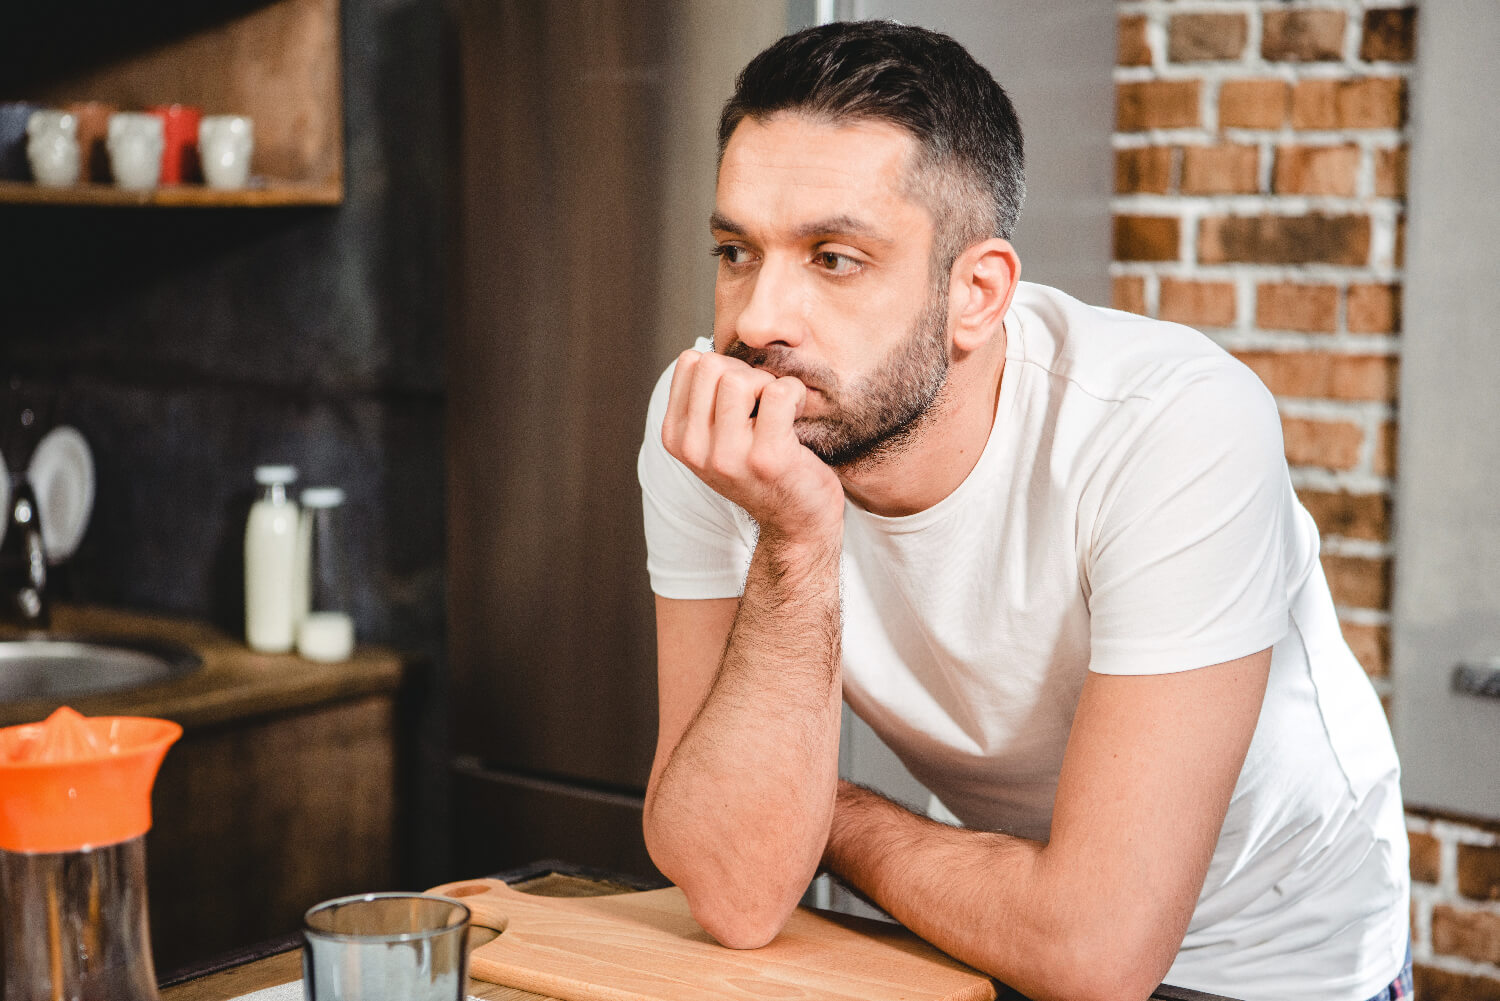 Depressed man leaning on a counter considering alcohol abuse treatment